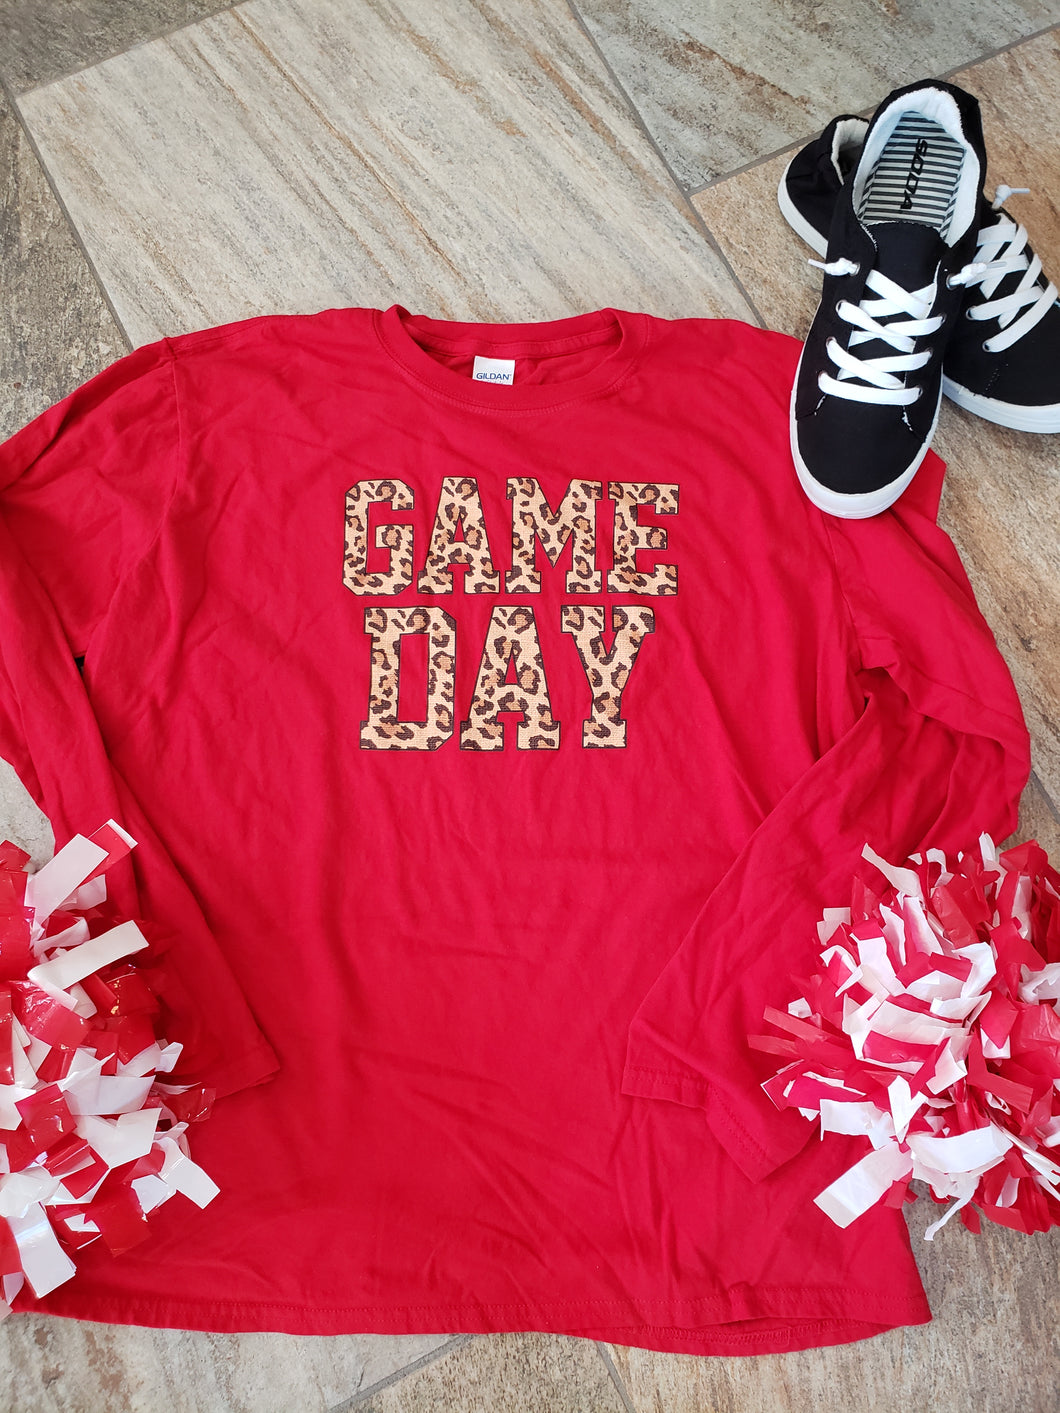 GD-0001 Cheetah game day red longsleeve